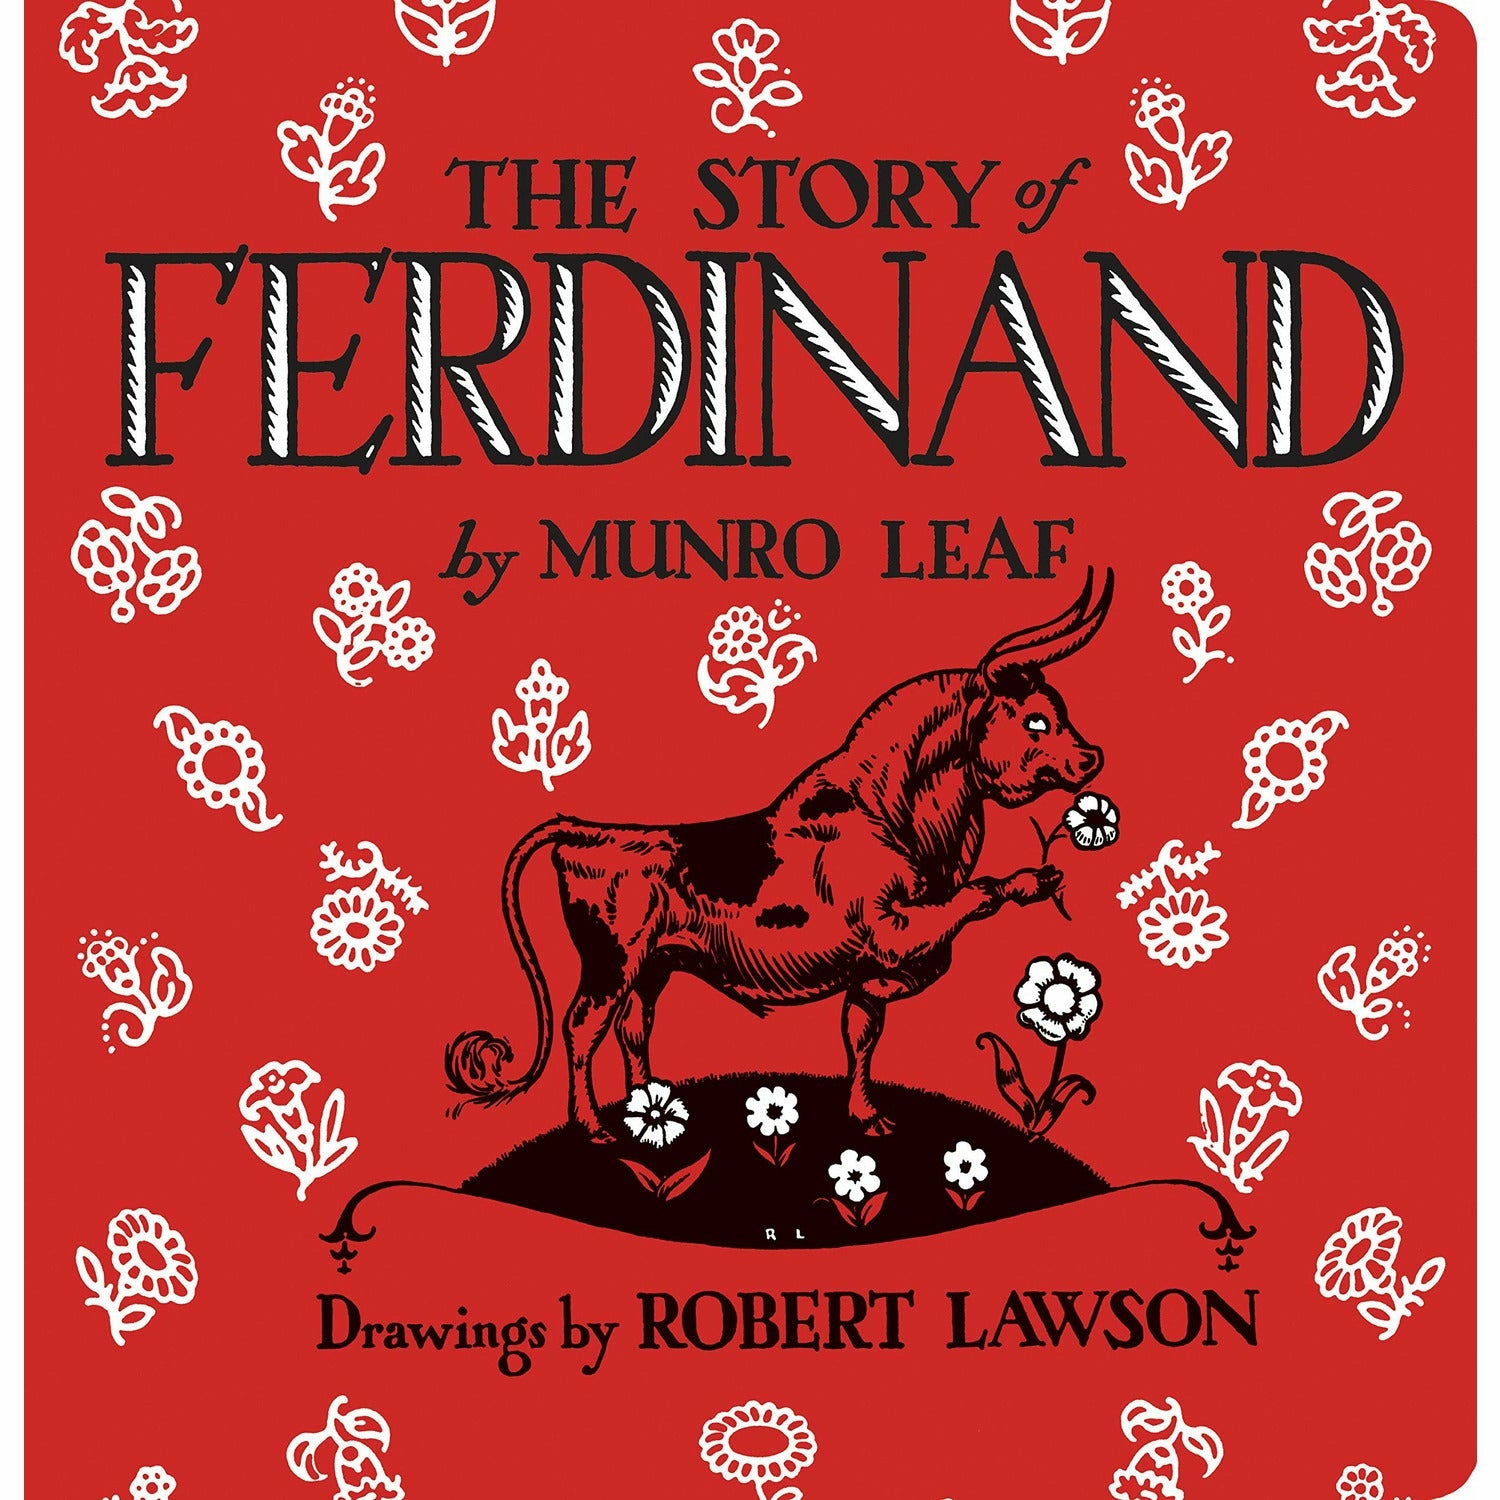 Image of Story of Ferdinand Board Book